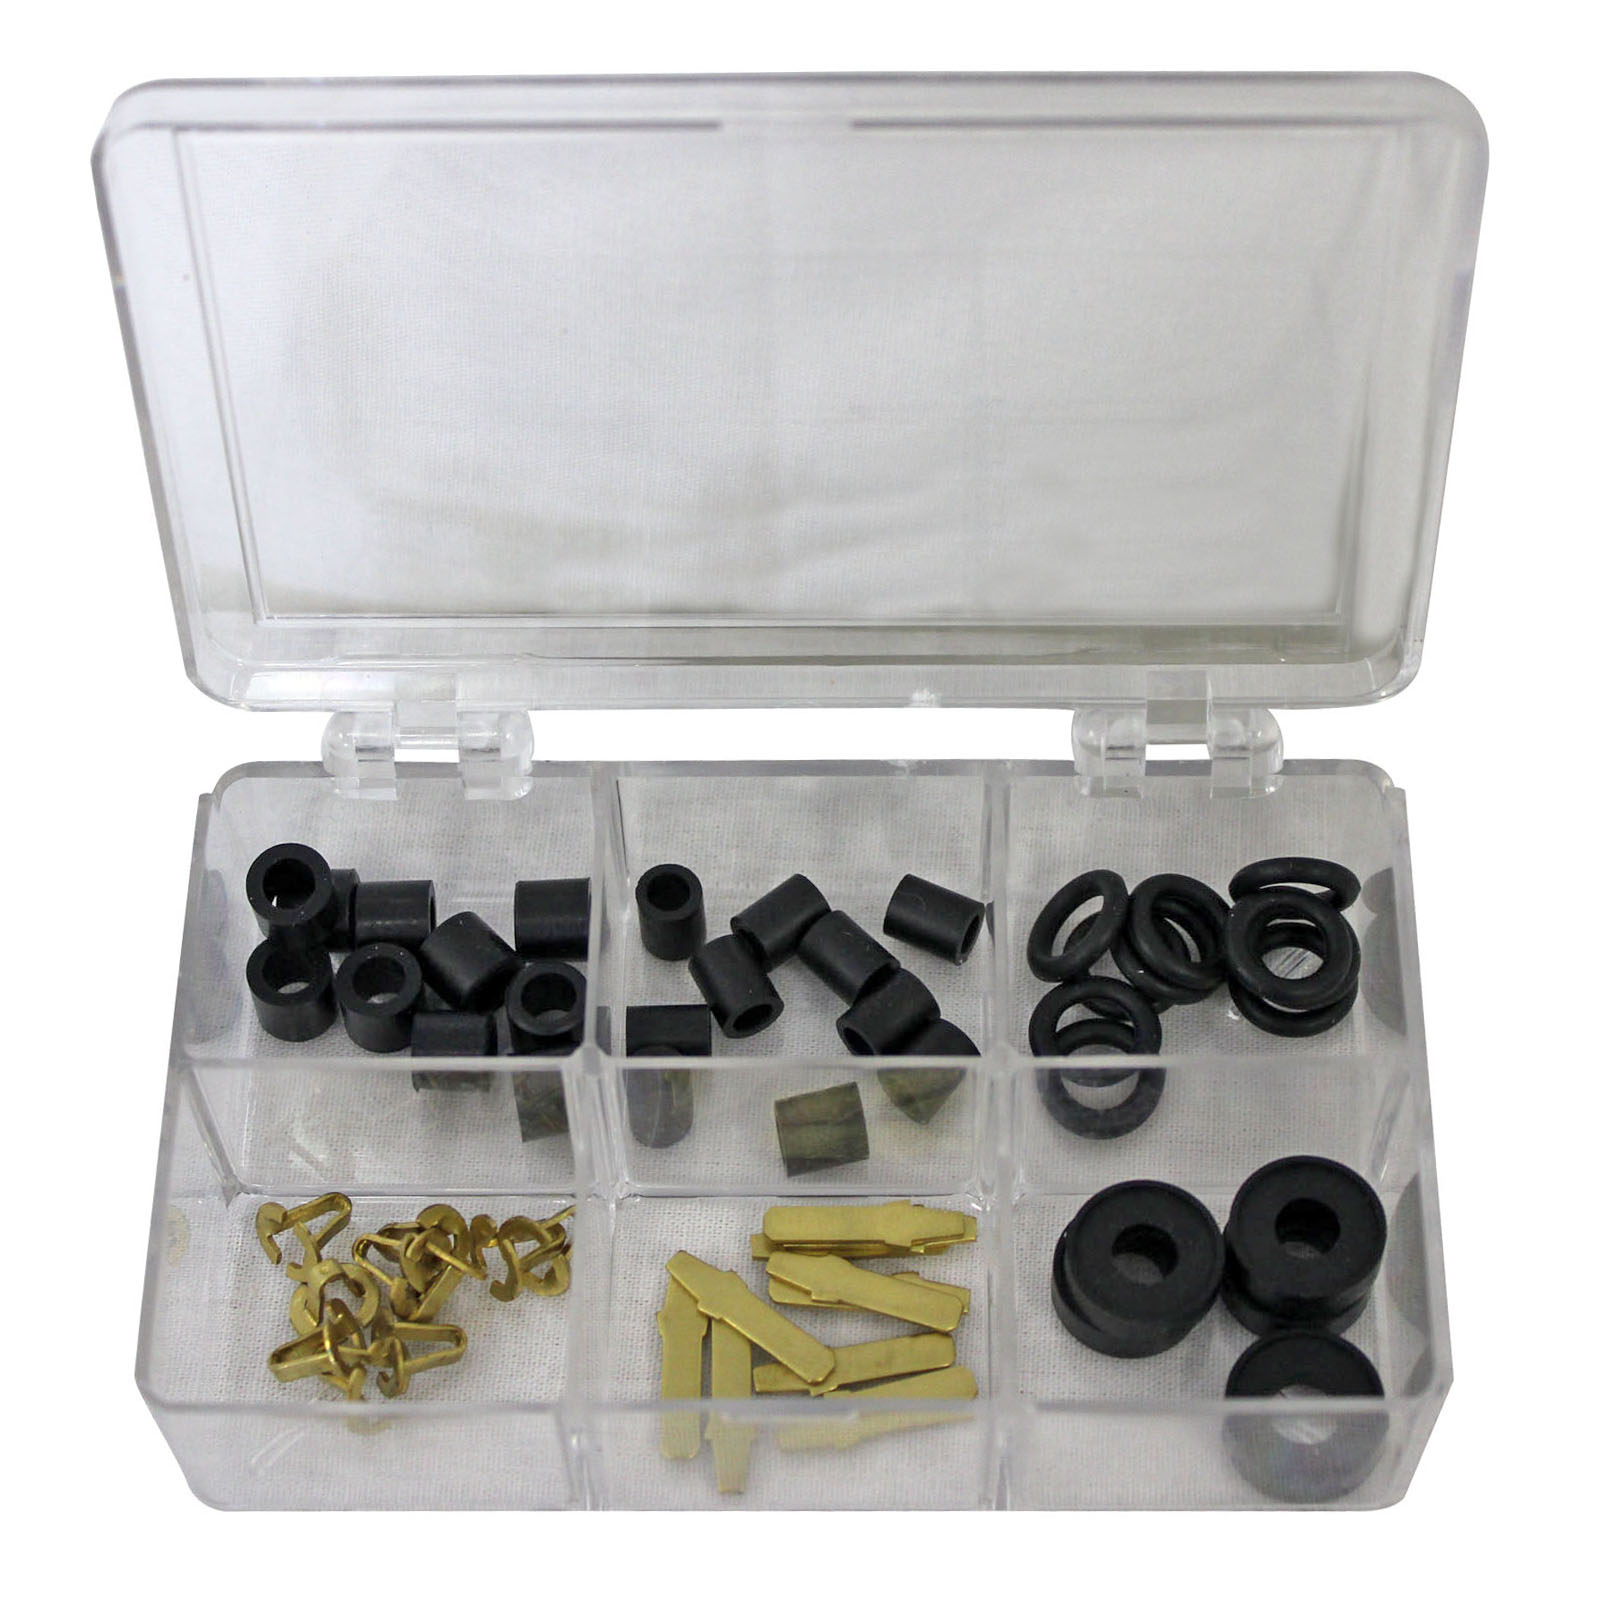 Mastercool 91334-a 134a R-12 Charging Hose Repair Kit for sale online 